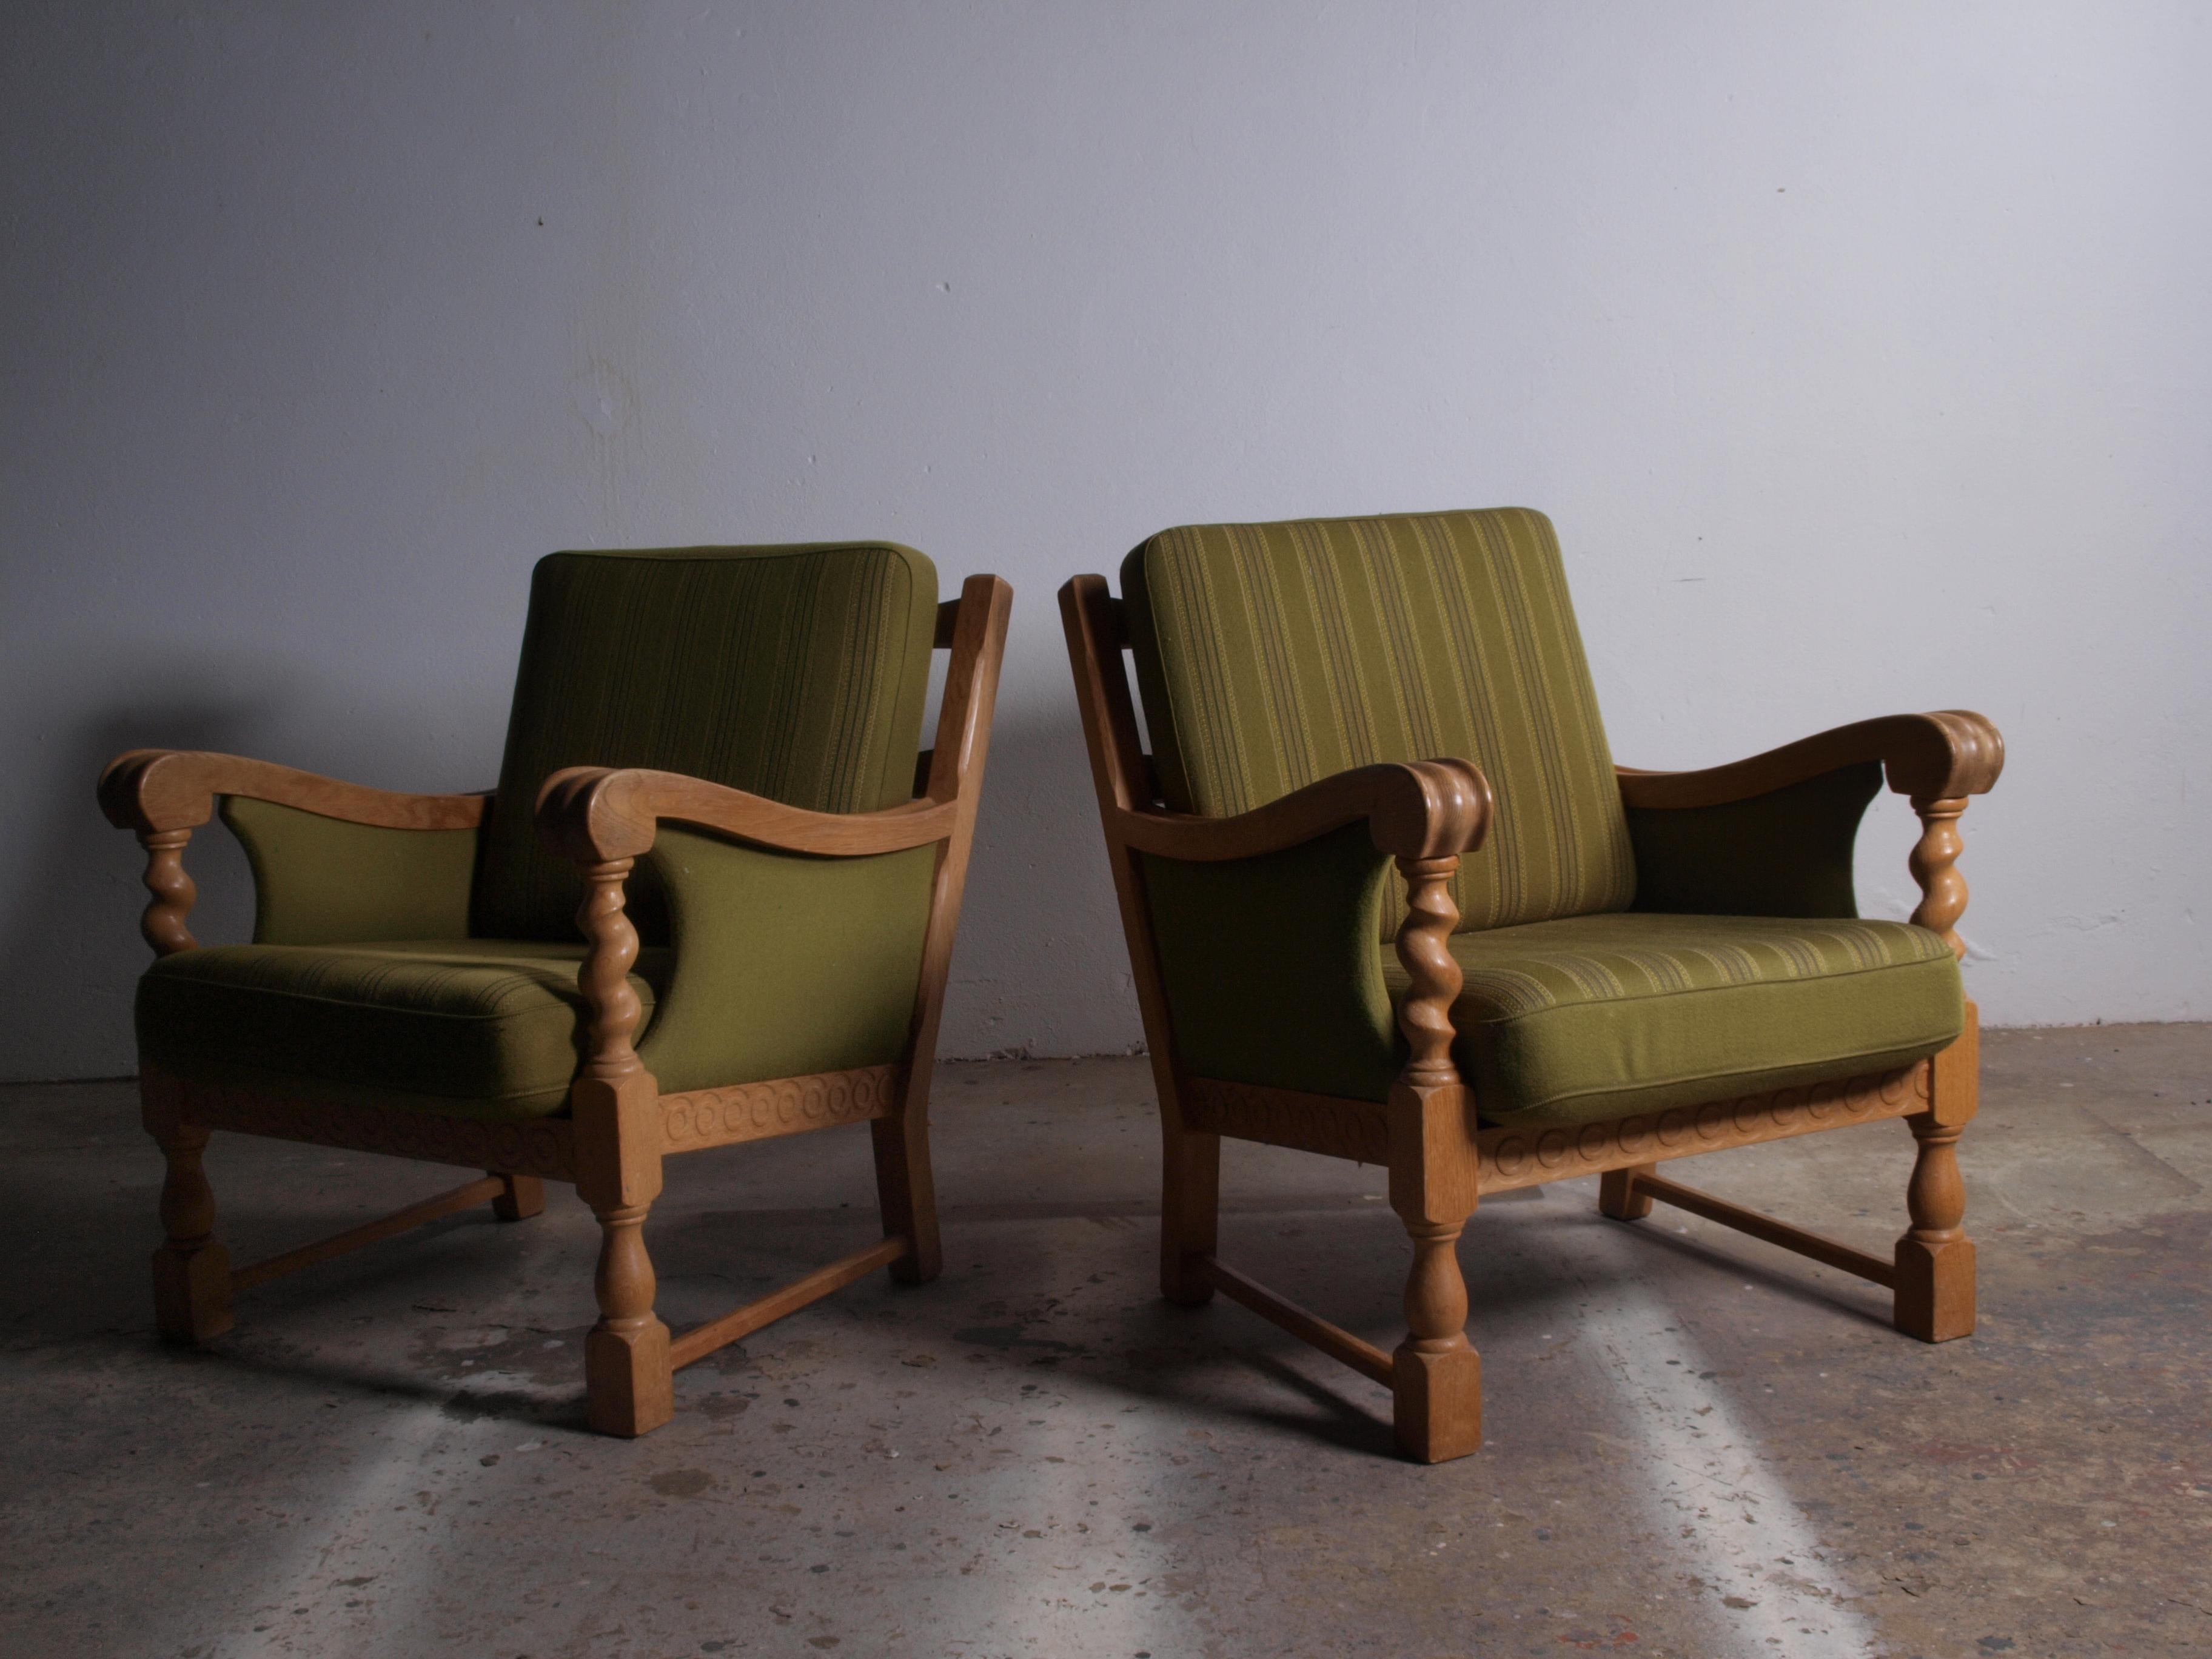 A beautiful set of Danish lounge chairs, resembling the style of Henning Henry Kjærnulf, forms a rare sculptural find. These chairs, crafted from oak and retaining their original savak wool upholstery. Created by an unknown Danish